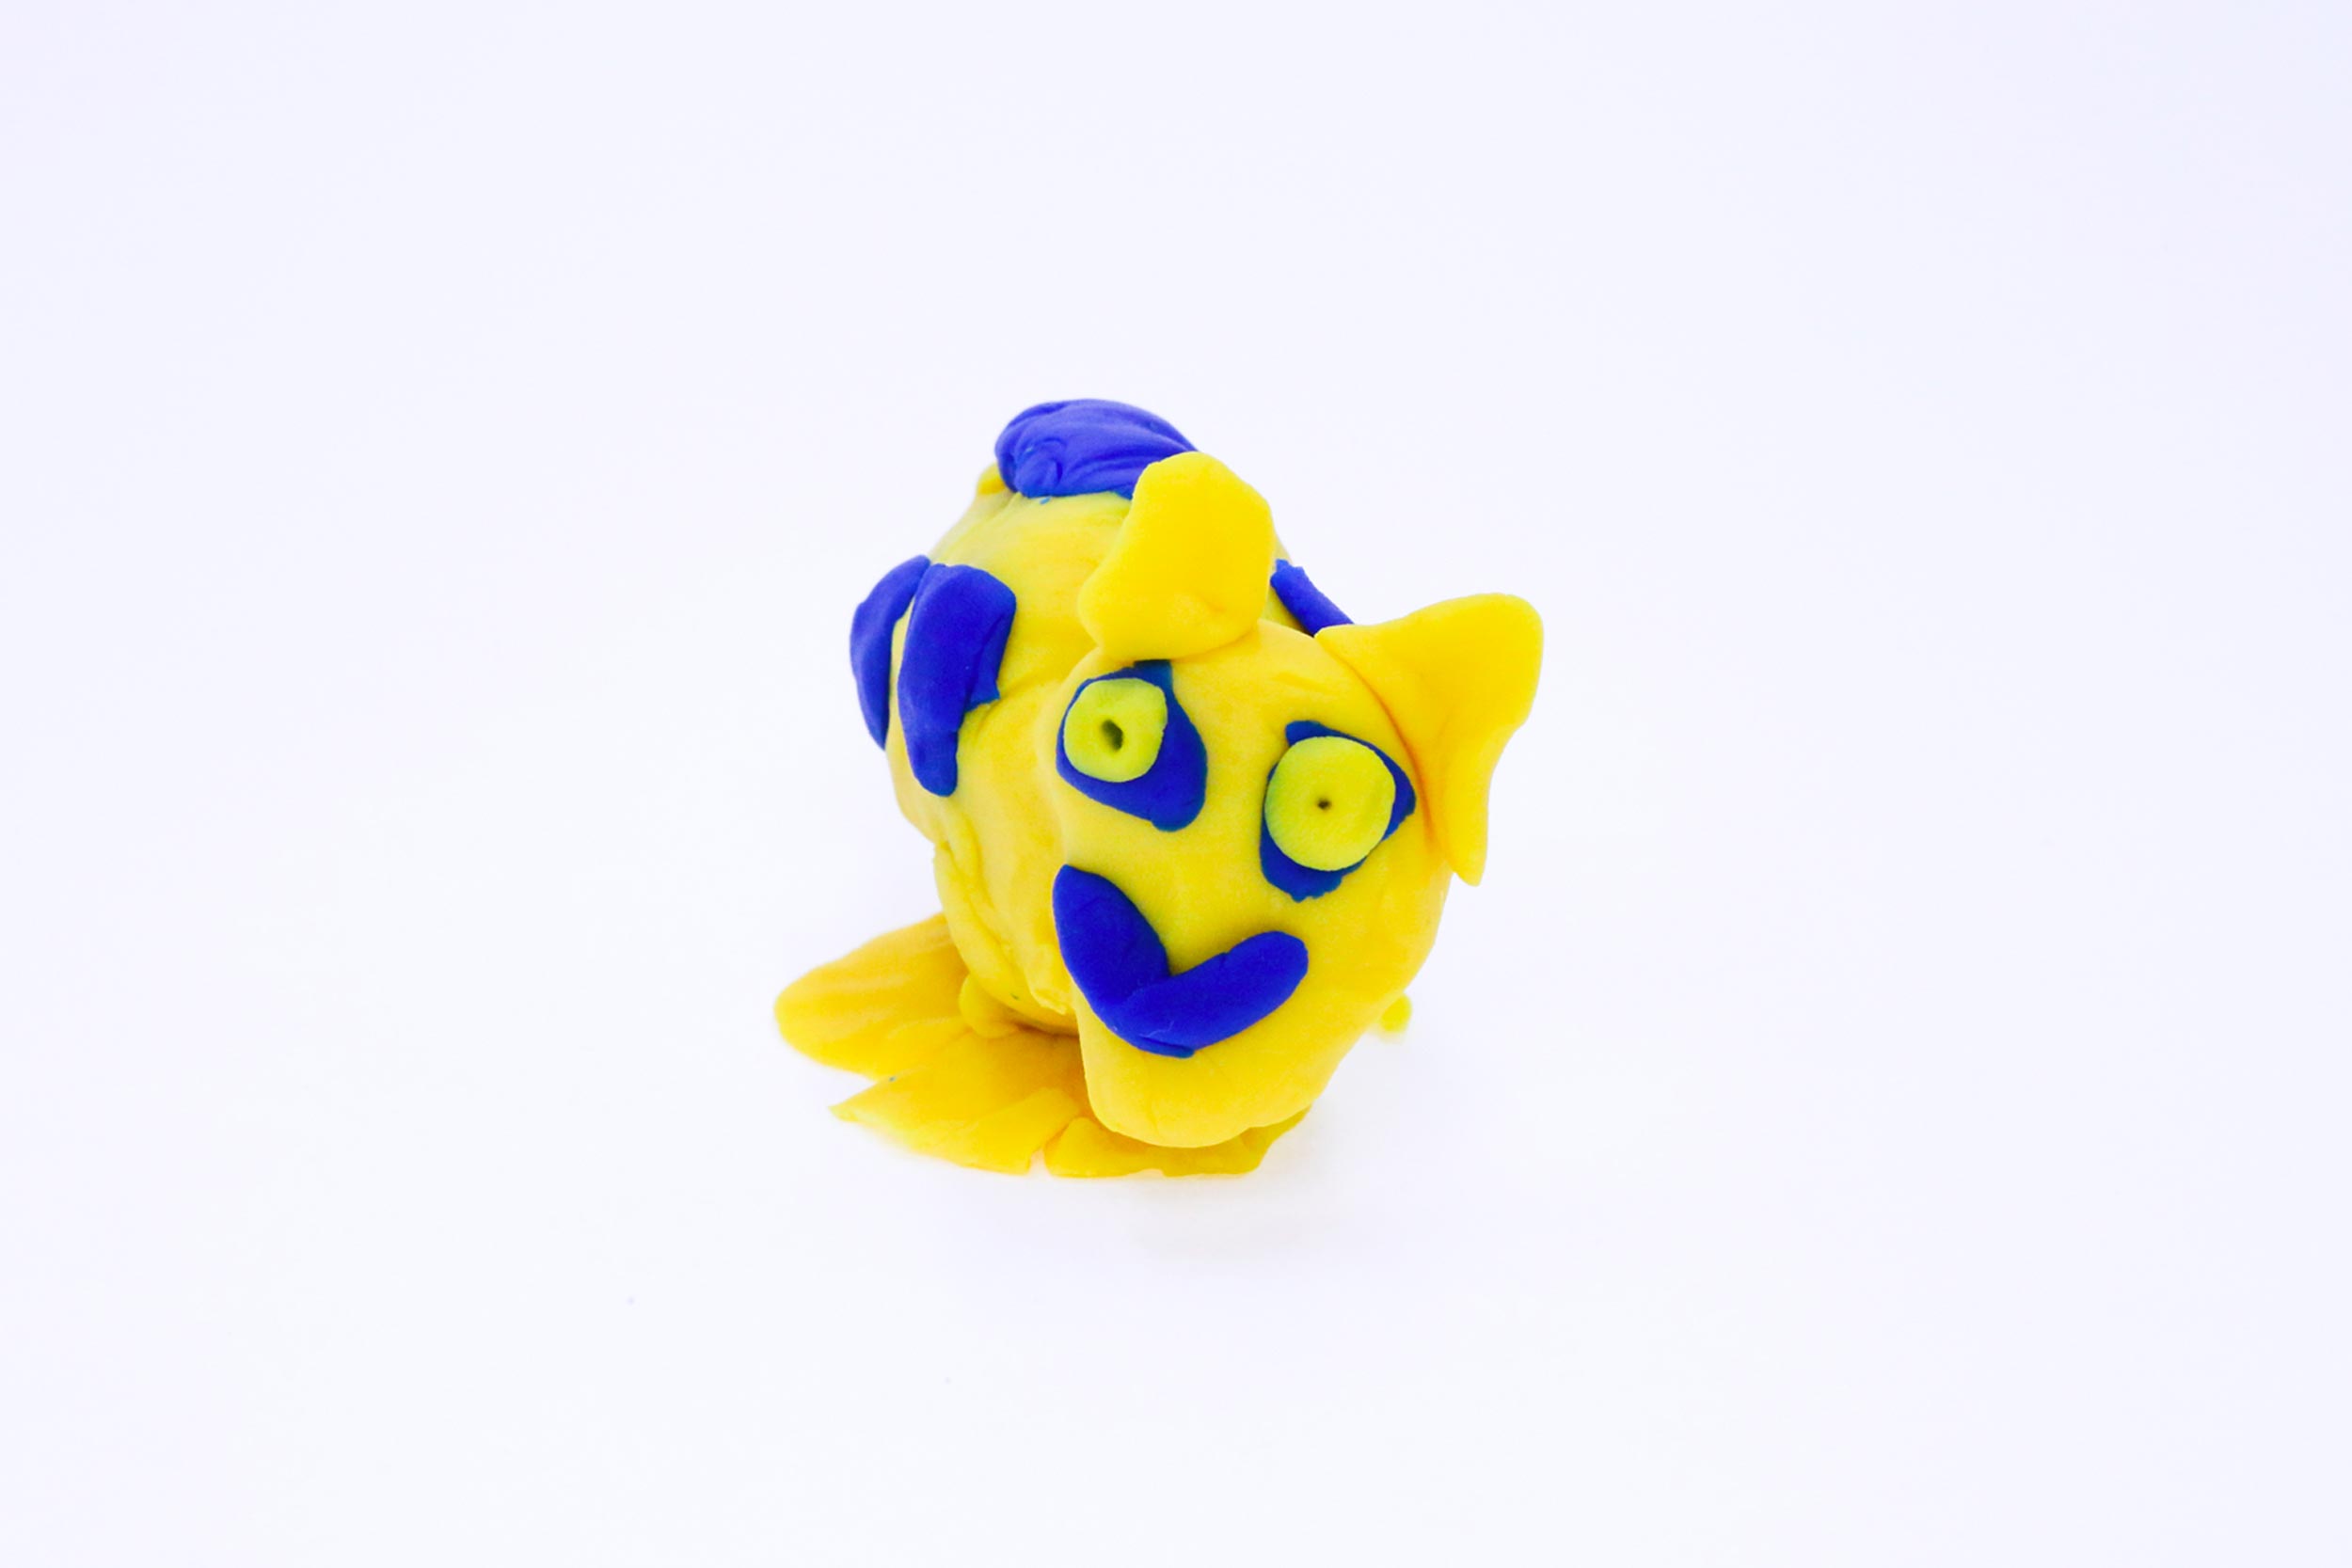 Chris Jnr is a yellow and blue play-dough sculpture that breathes fire and has bone crushing teeth.